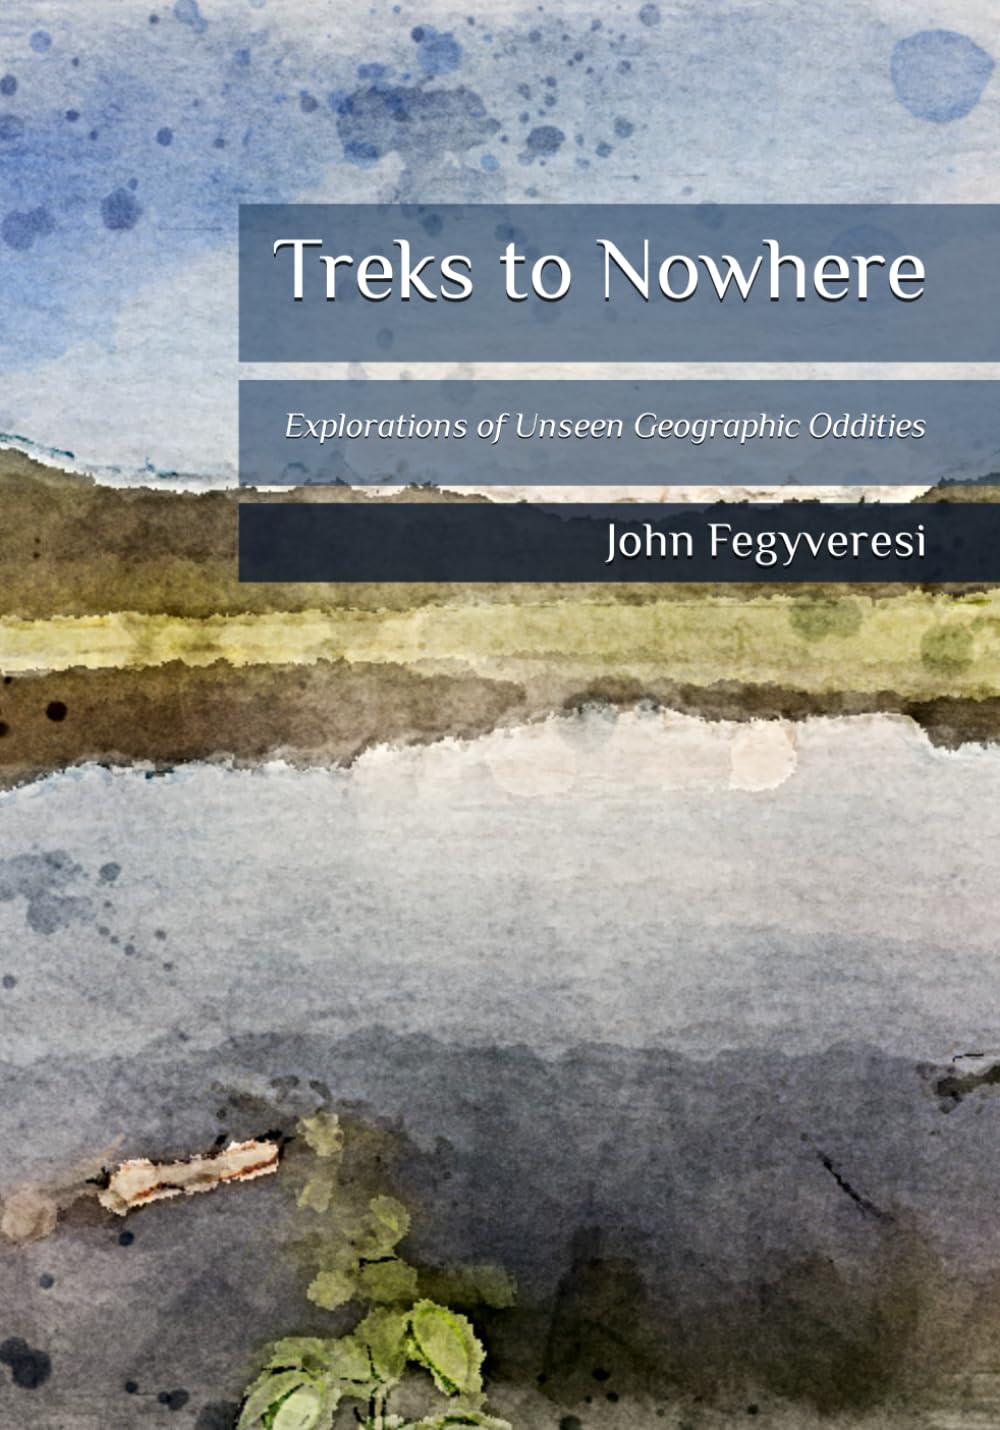 Treks to Nowhere: Explorations of Unseen Geographic Oddities